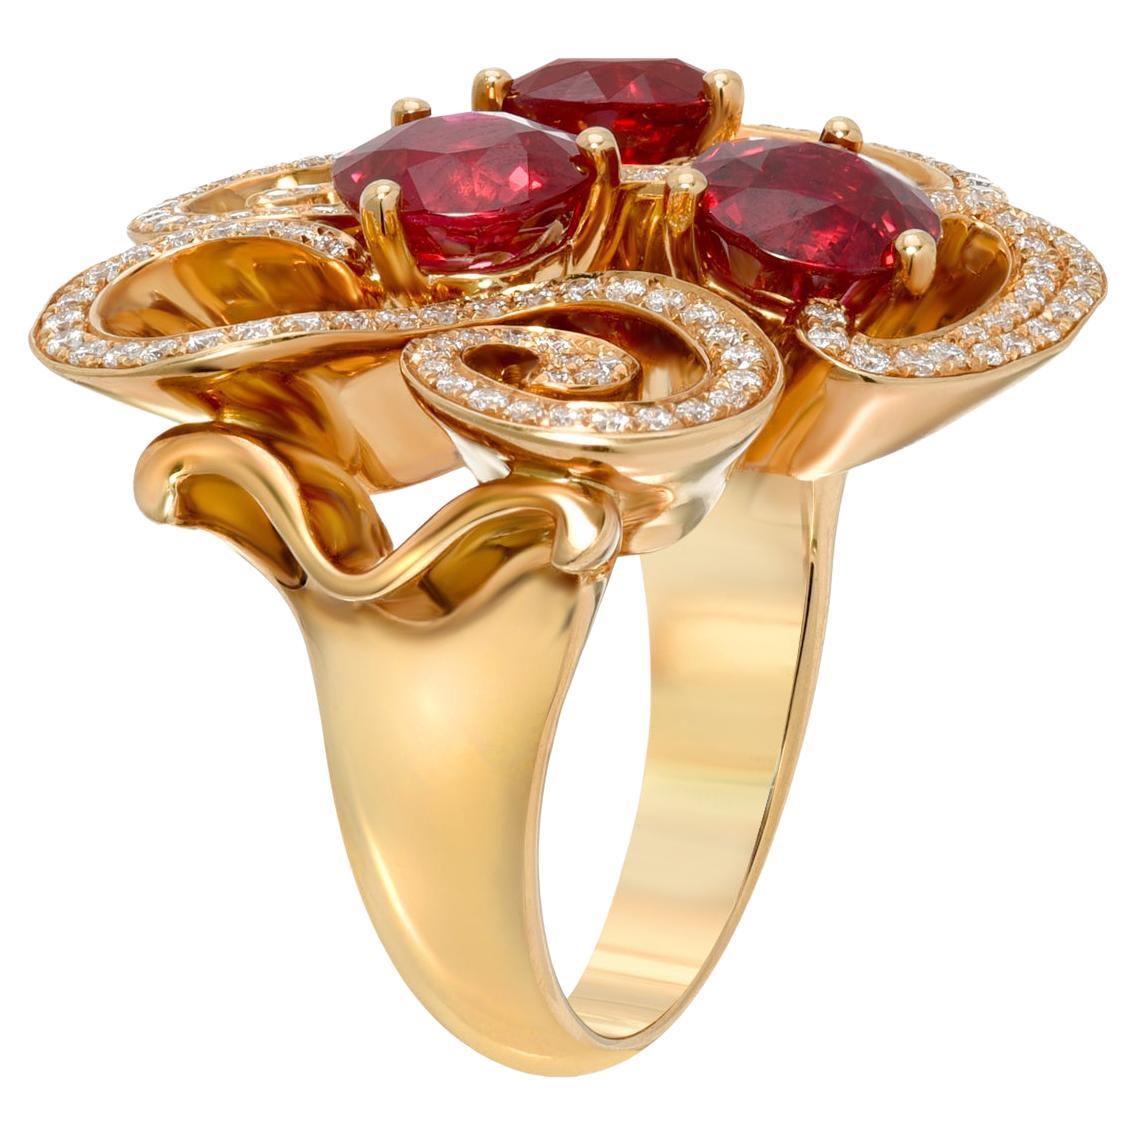 An exceptional trio of round Burma Ruby, weighing a total of 3.82 carats, are surrounded by a total of 0.49 carat round brilliant diamonds, in this magnificent 18K yellow gold Burma Ruby ring.
Size 5.75. Re-sizing is complimentary upon